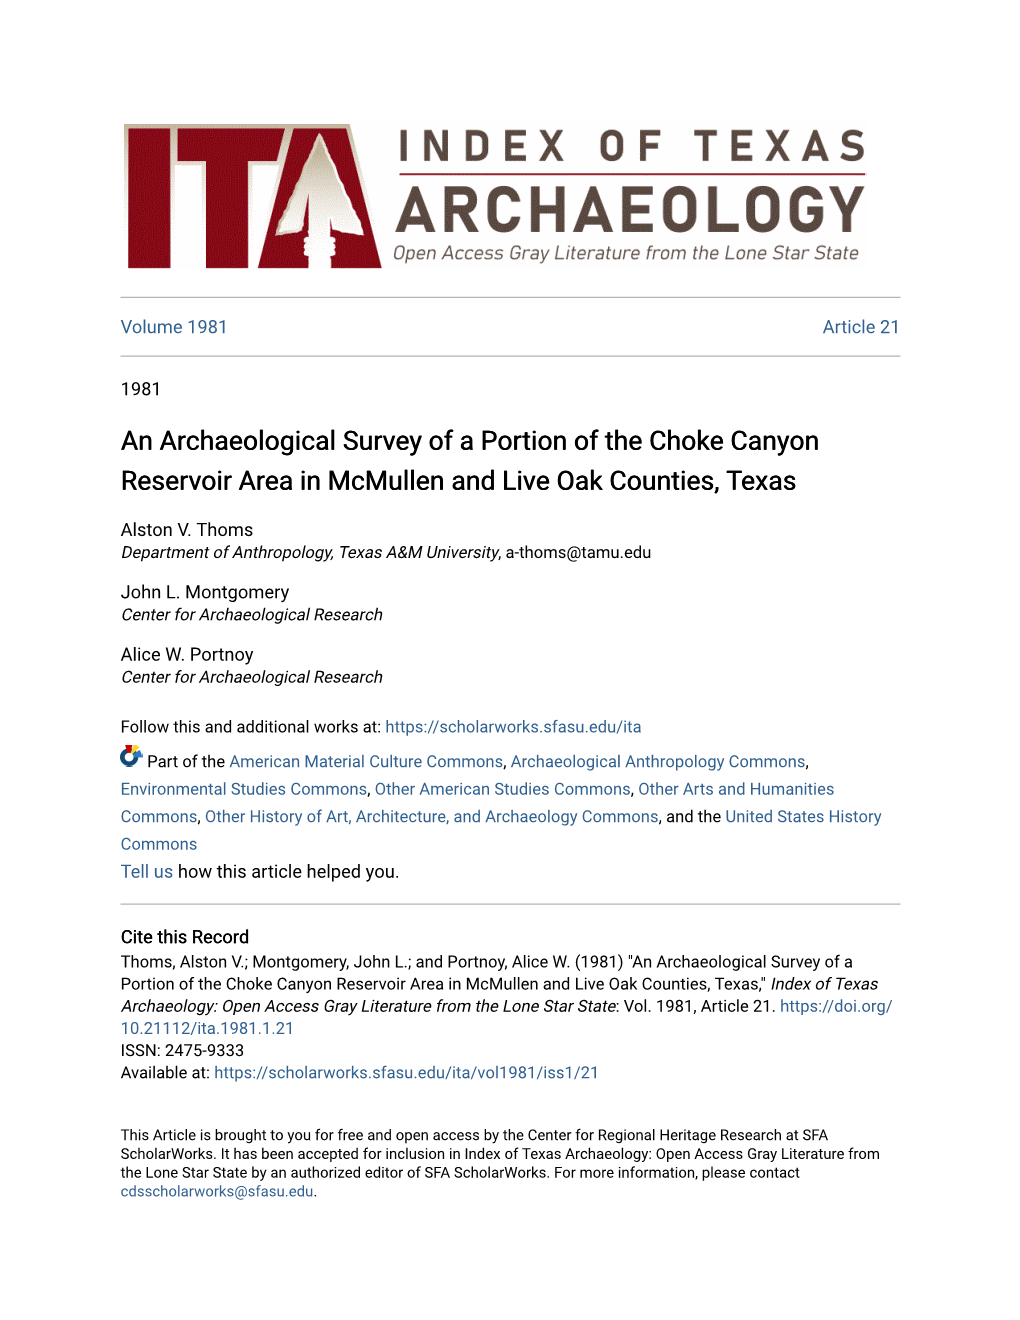 An Archaeological Survey of a Portion of the Choke Canyon Reservoir Area in Mcmullen and Live Oak Counties, Texas